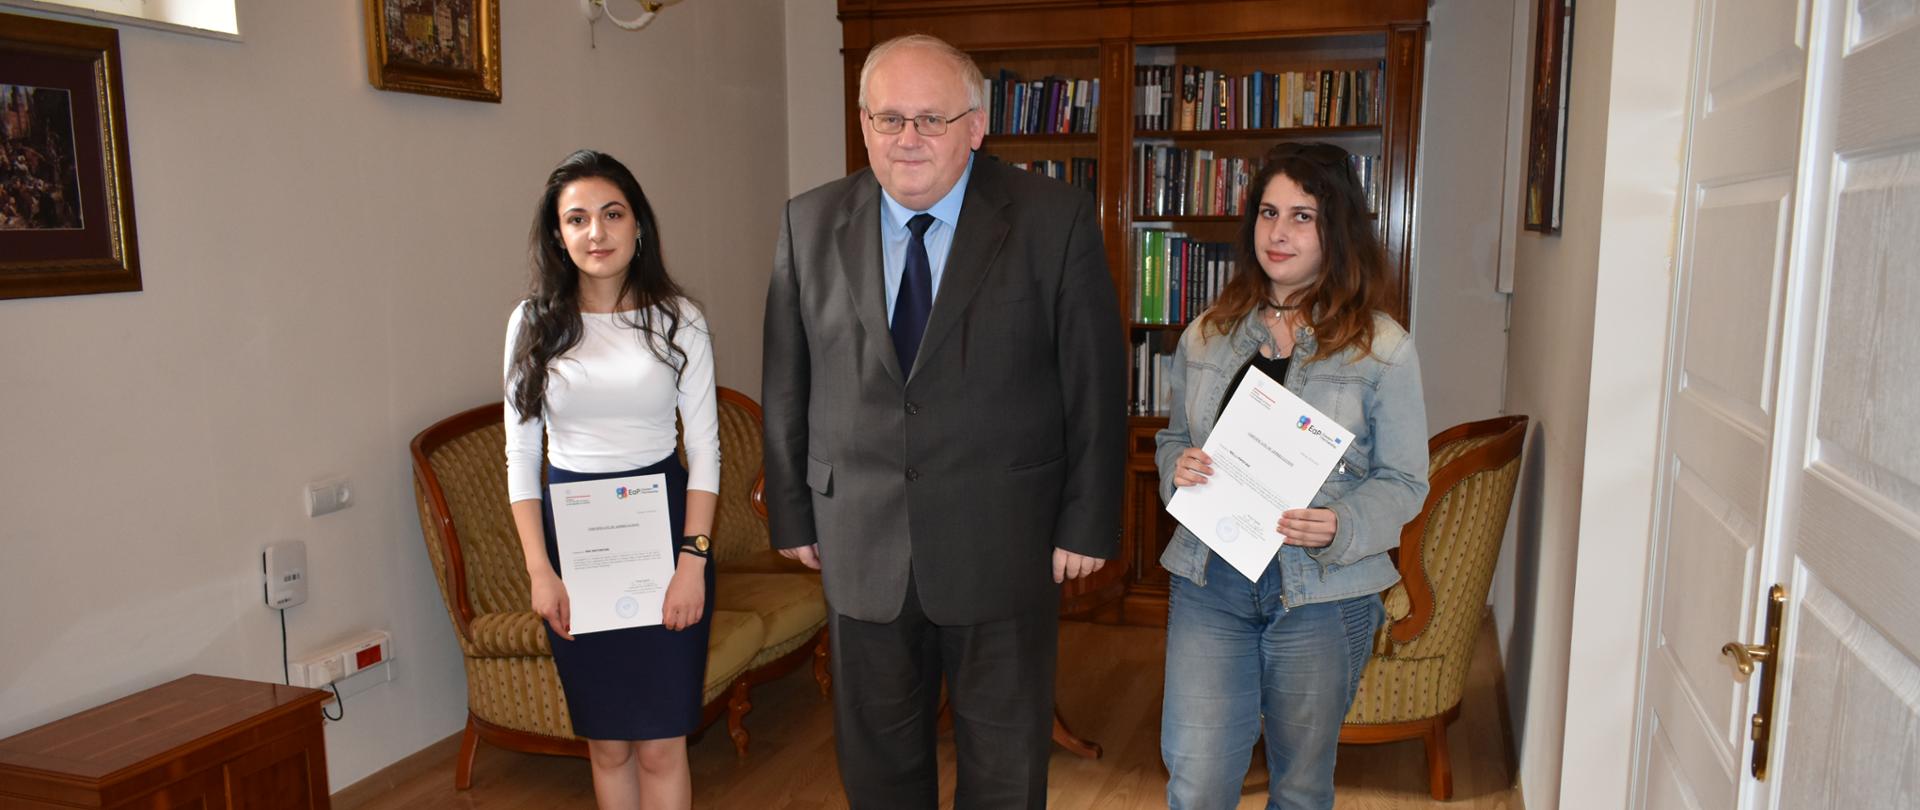 Certificates of participation for EaP Student Essay Competition